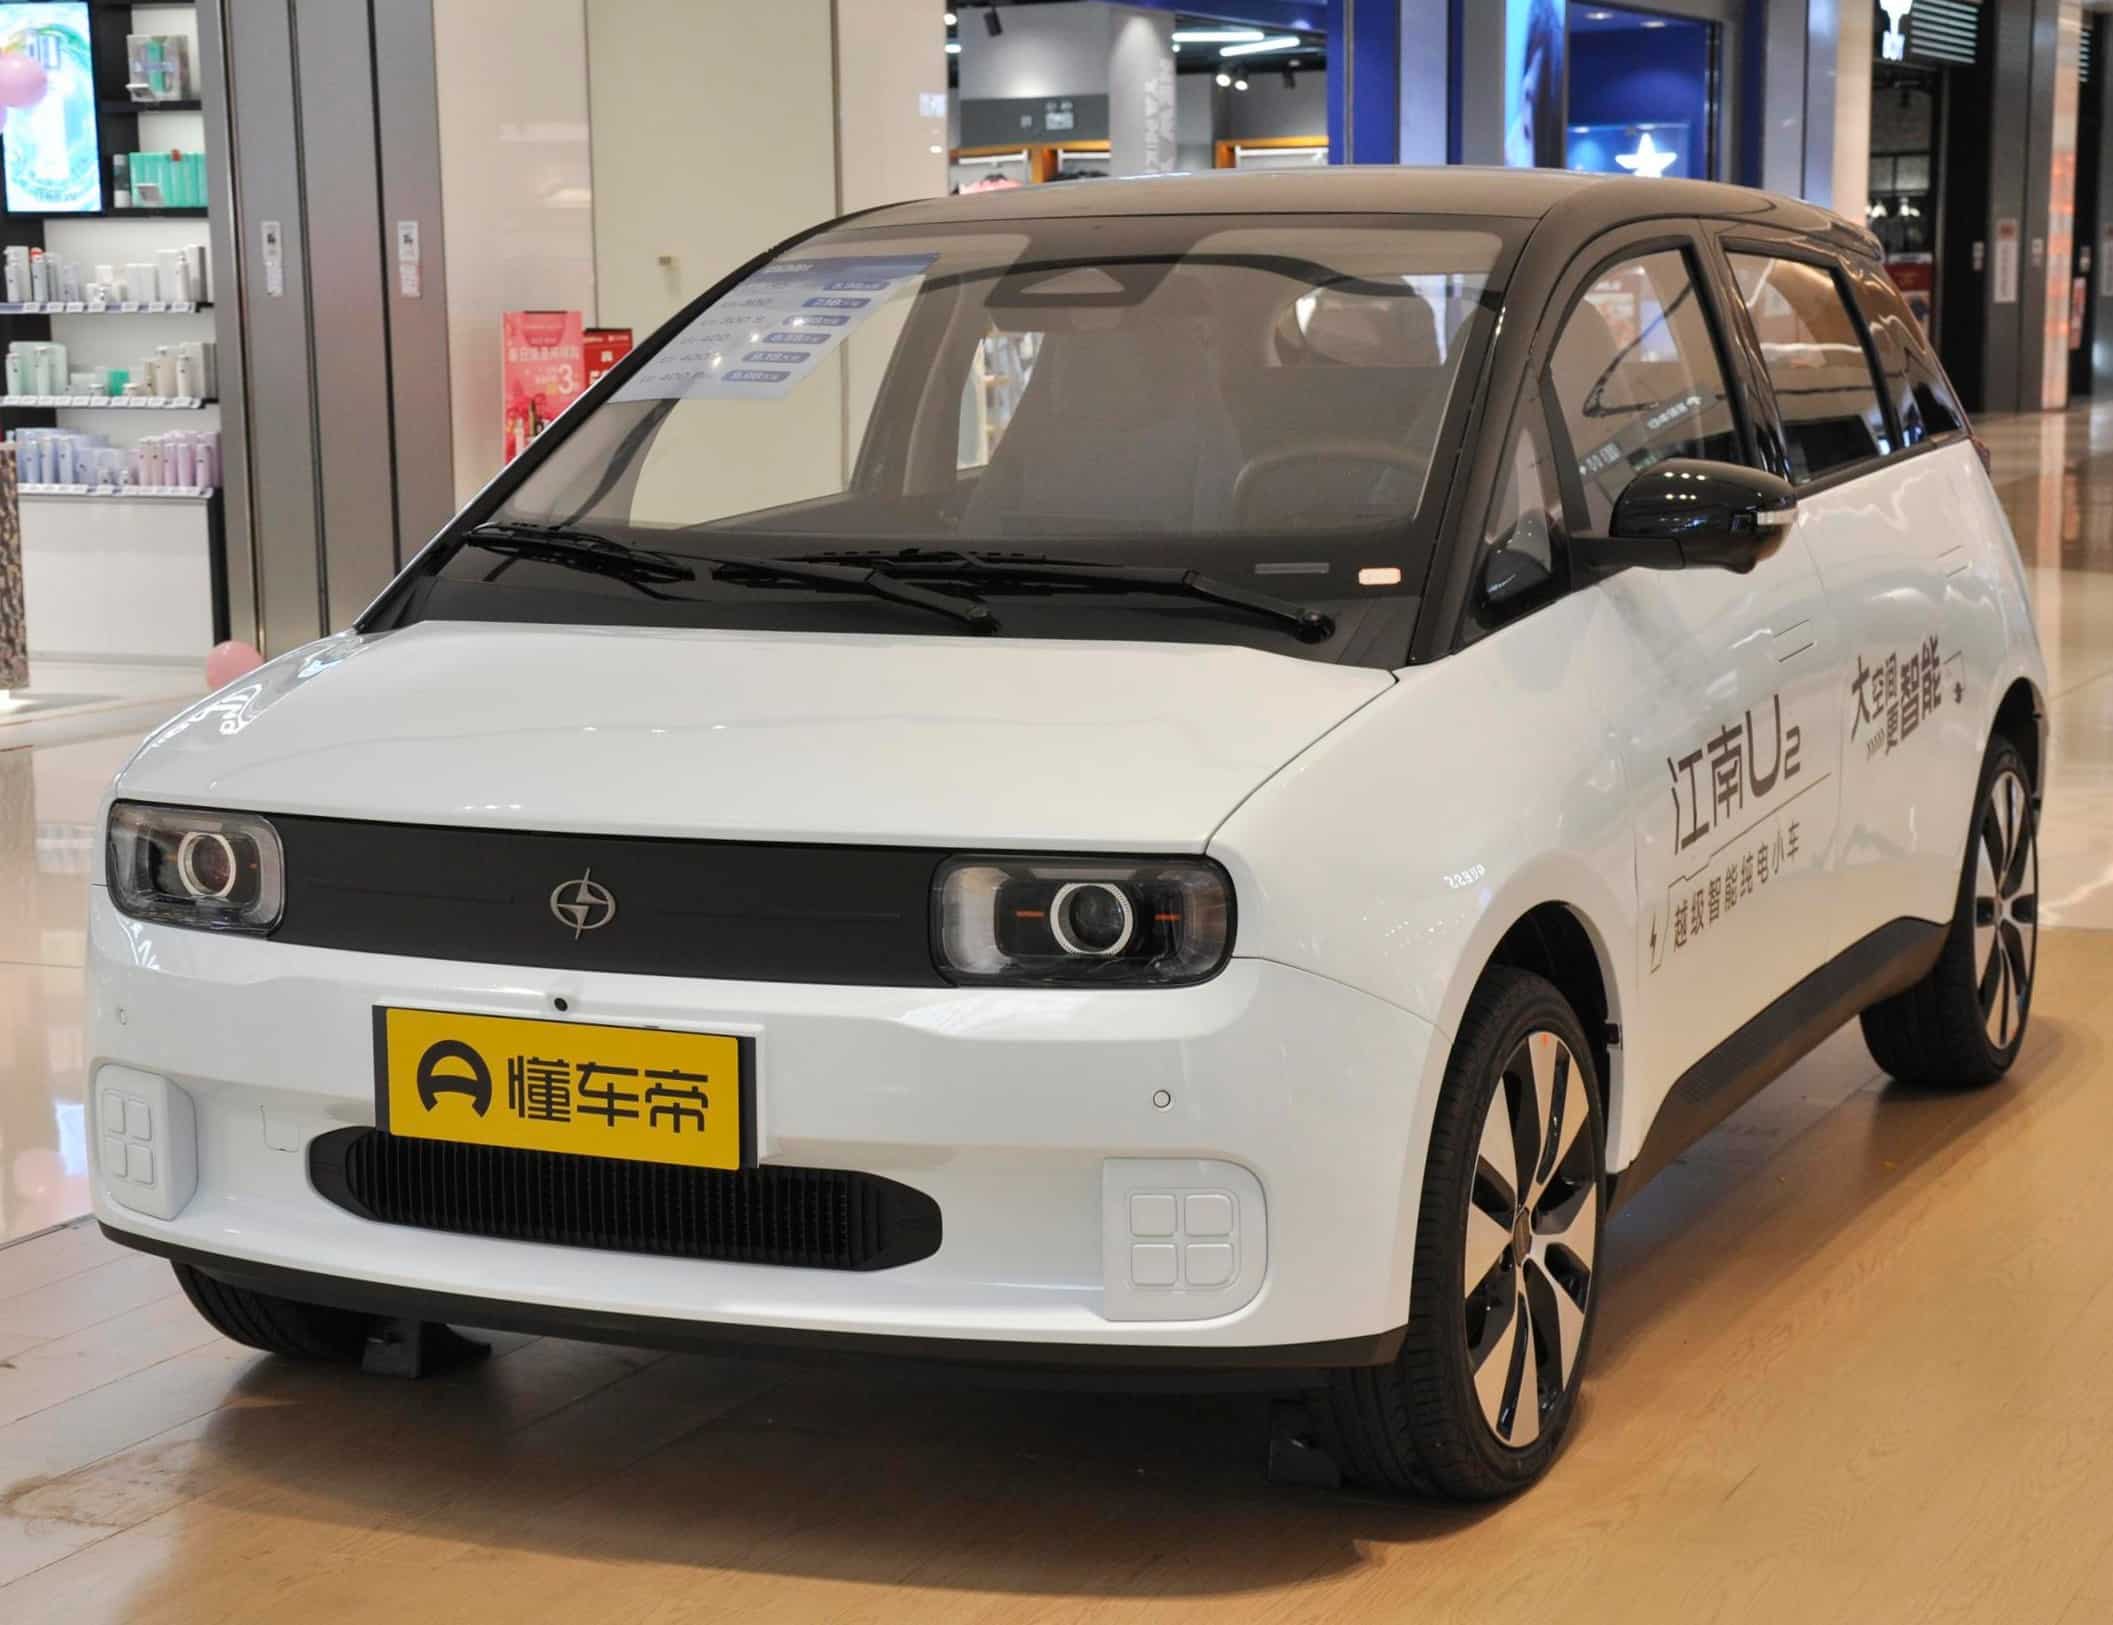 Jiangnan U2 Is A Somewhat Different Electric Hatchback In China